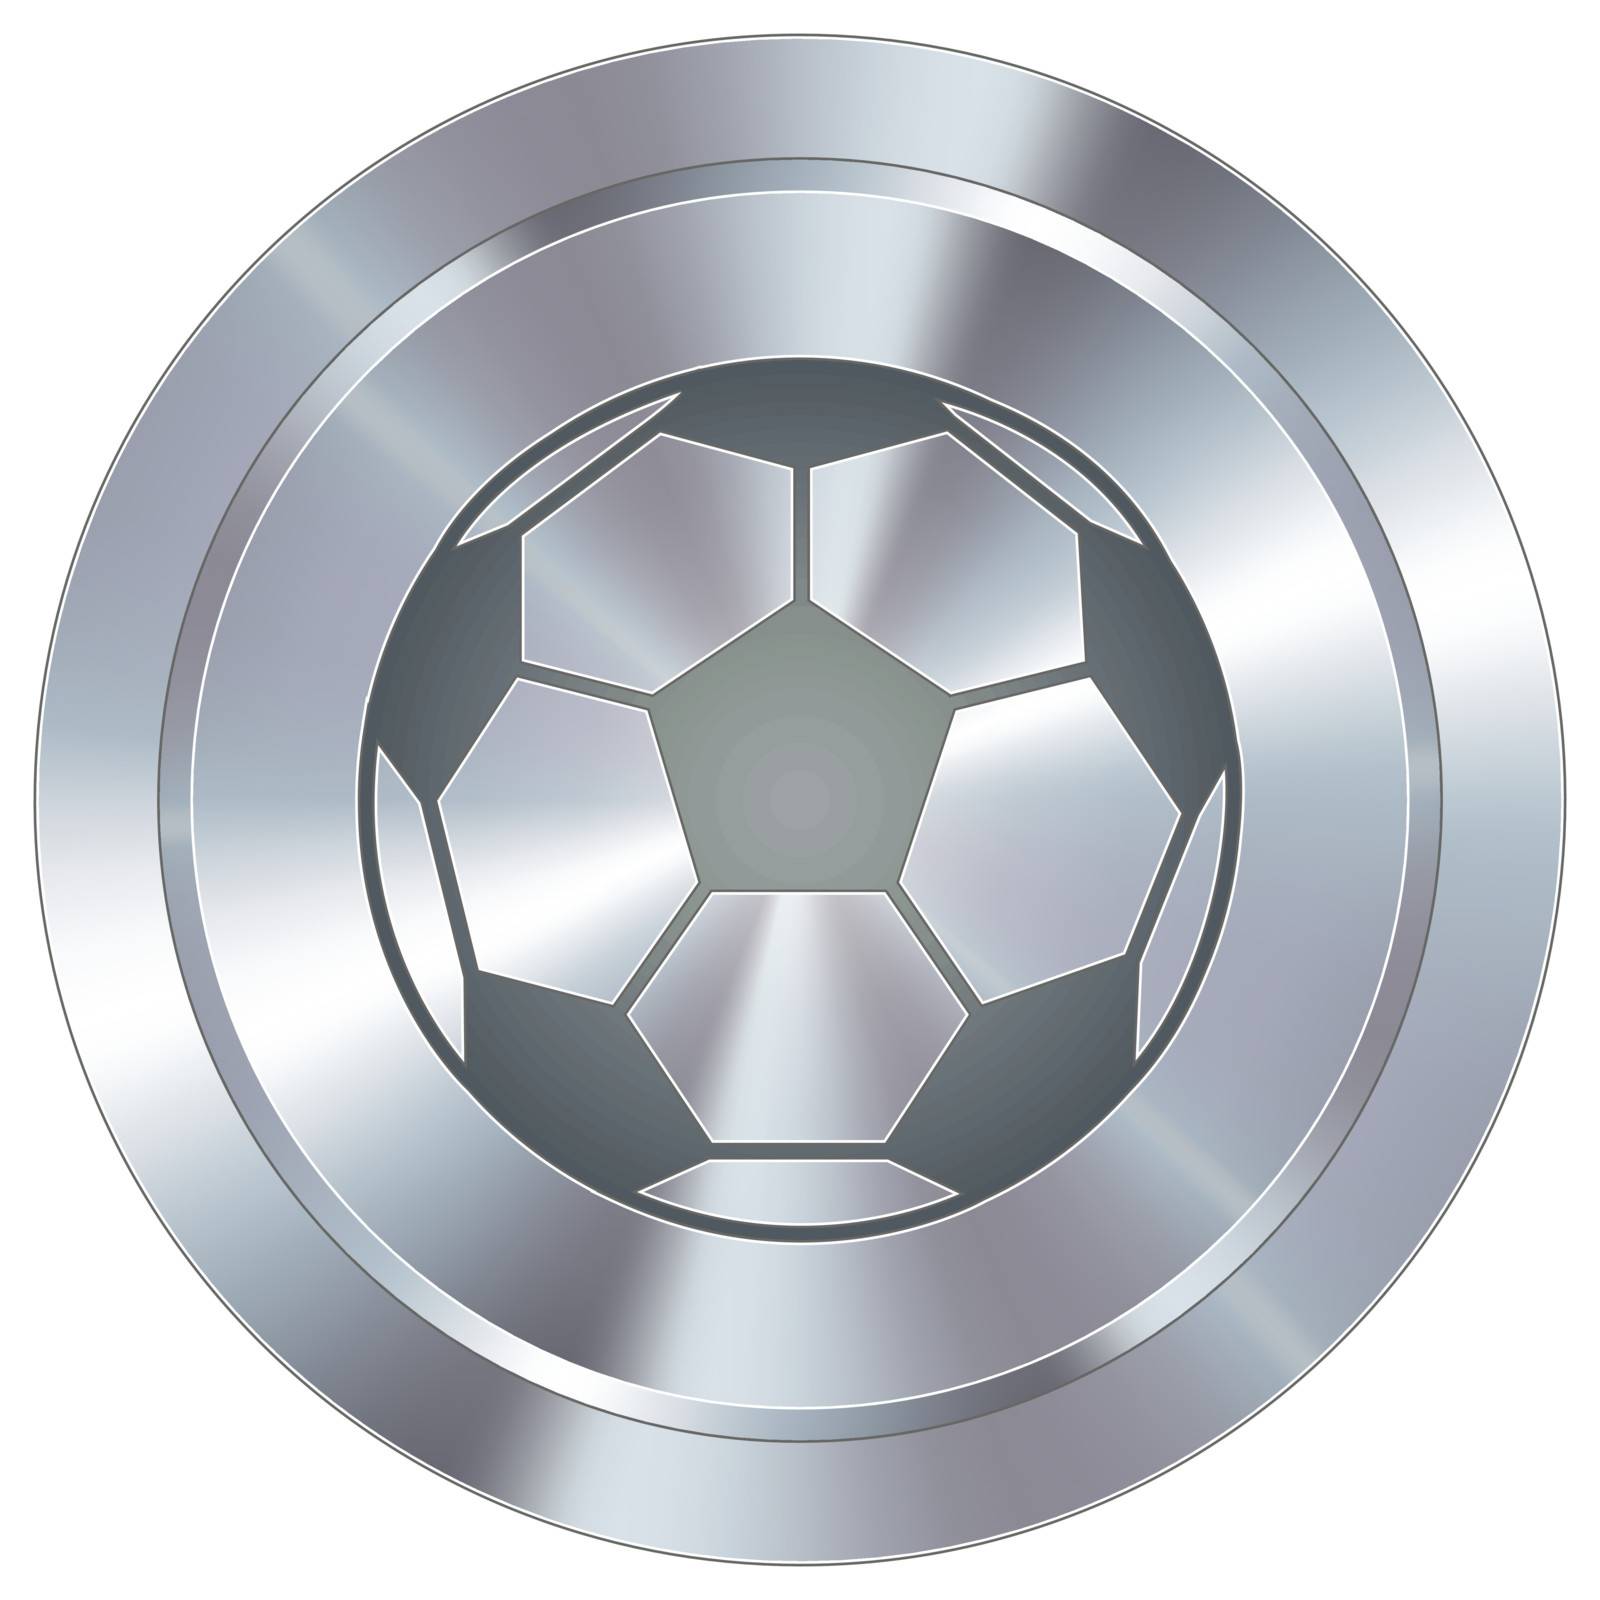 Soccer sport icon on round stainless steel modern industrial button